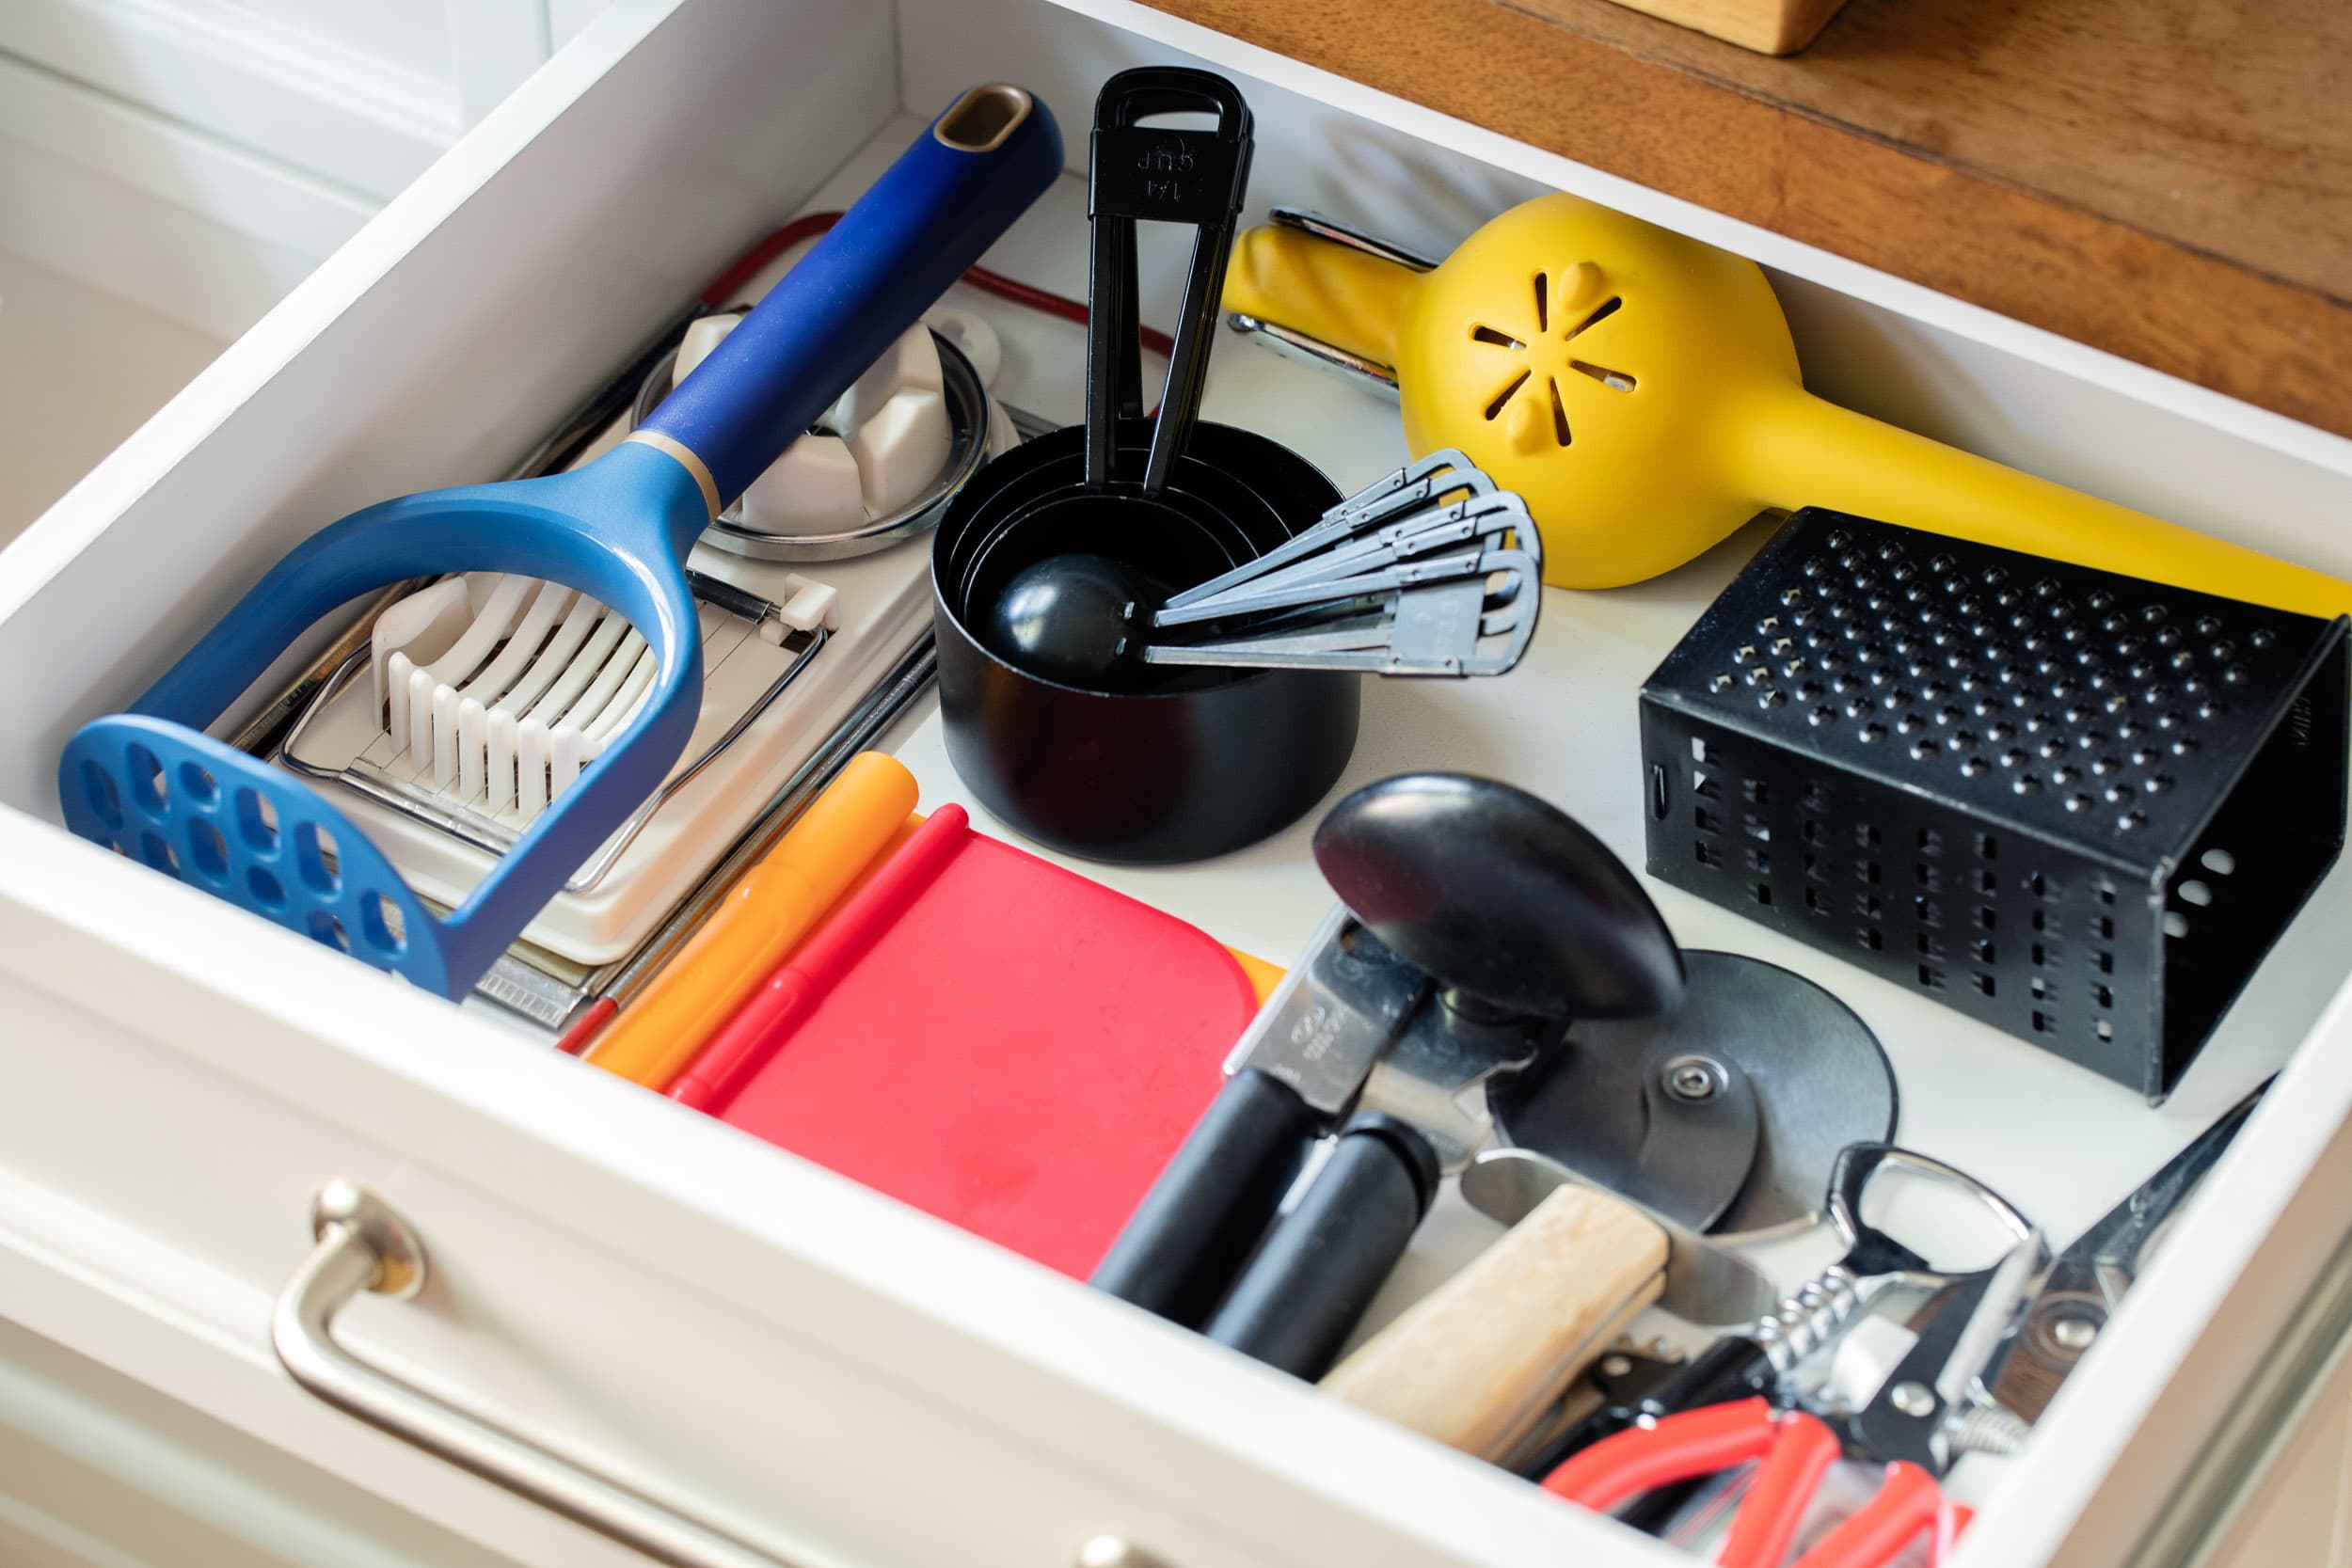 https://cdn.apartmenttherapy.info/image/upload/v1628706207/k/Photo/Lifestyle/2021-08-The-Most-Brilliant-Drawer-Organizing-Tip-That-Everyone-Needs-to-Hear/Kitchn-2021-Drawer-Organizing-Tip-2.jpg